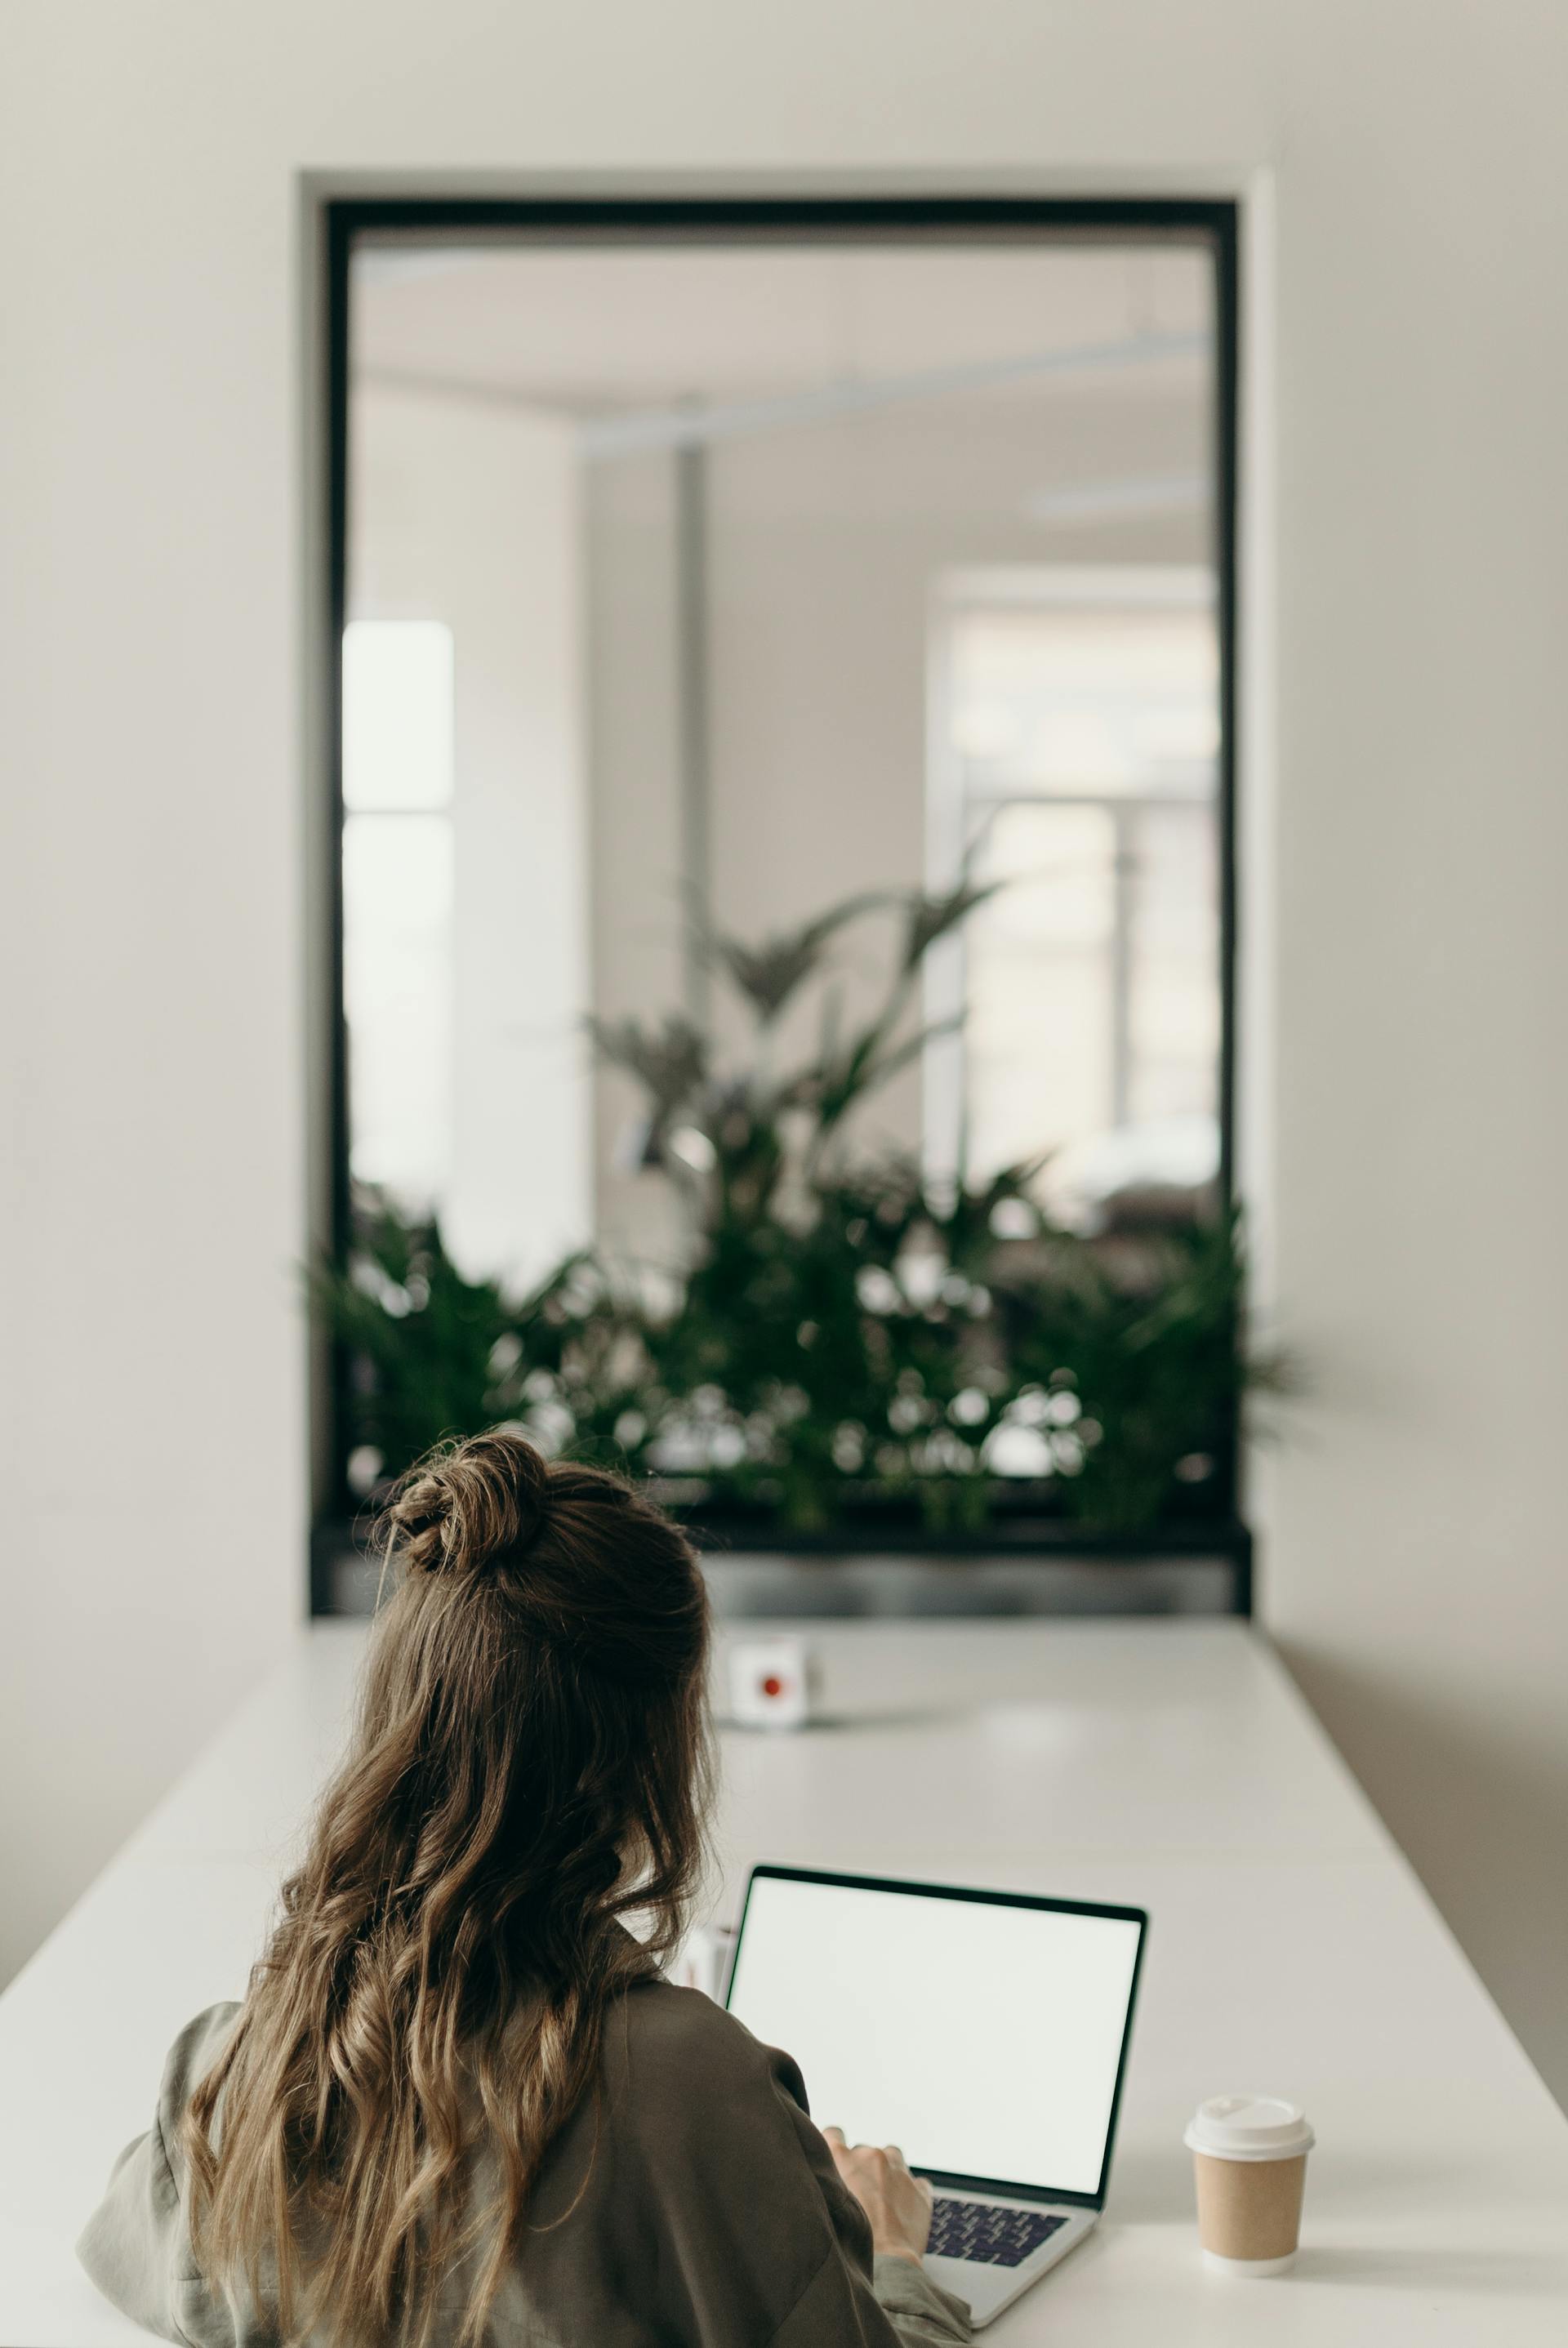 A woman working on her laptop | Source: Pexels